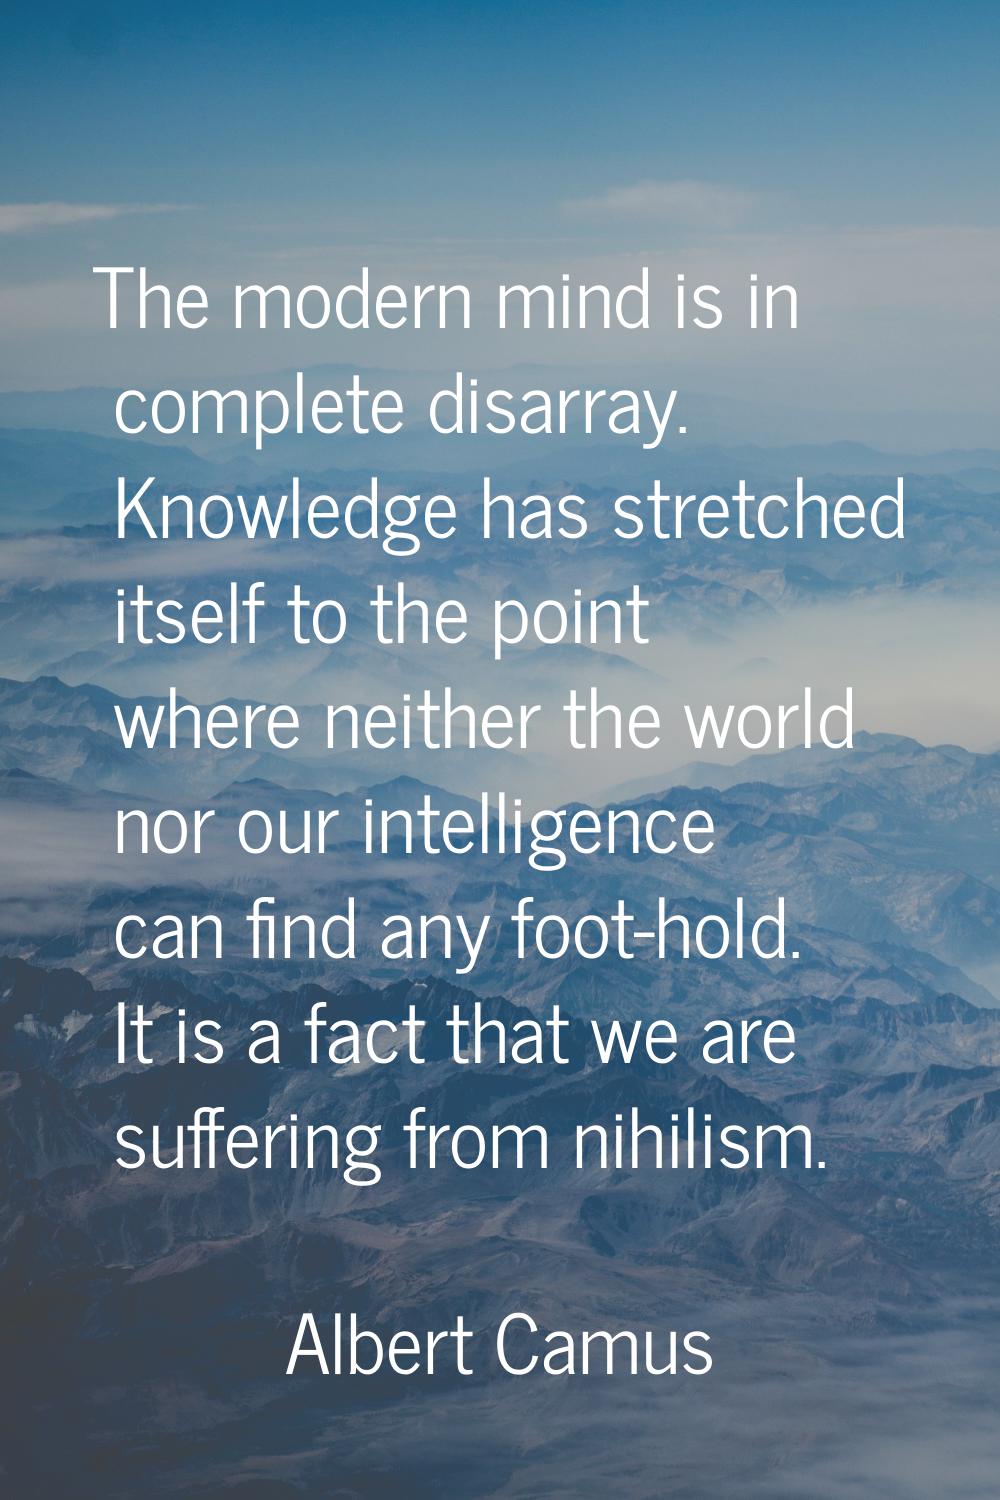 The modern mind is in complete disarray. Knowledge has stretched itself to the point where neither 